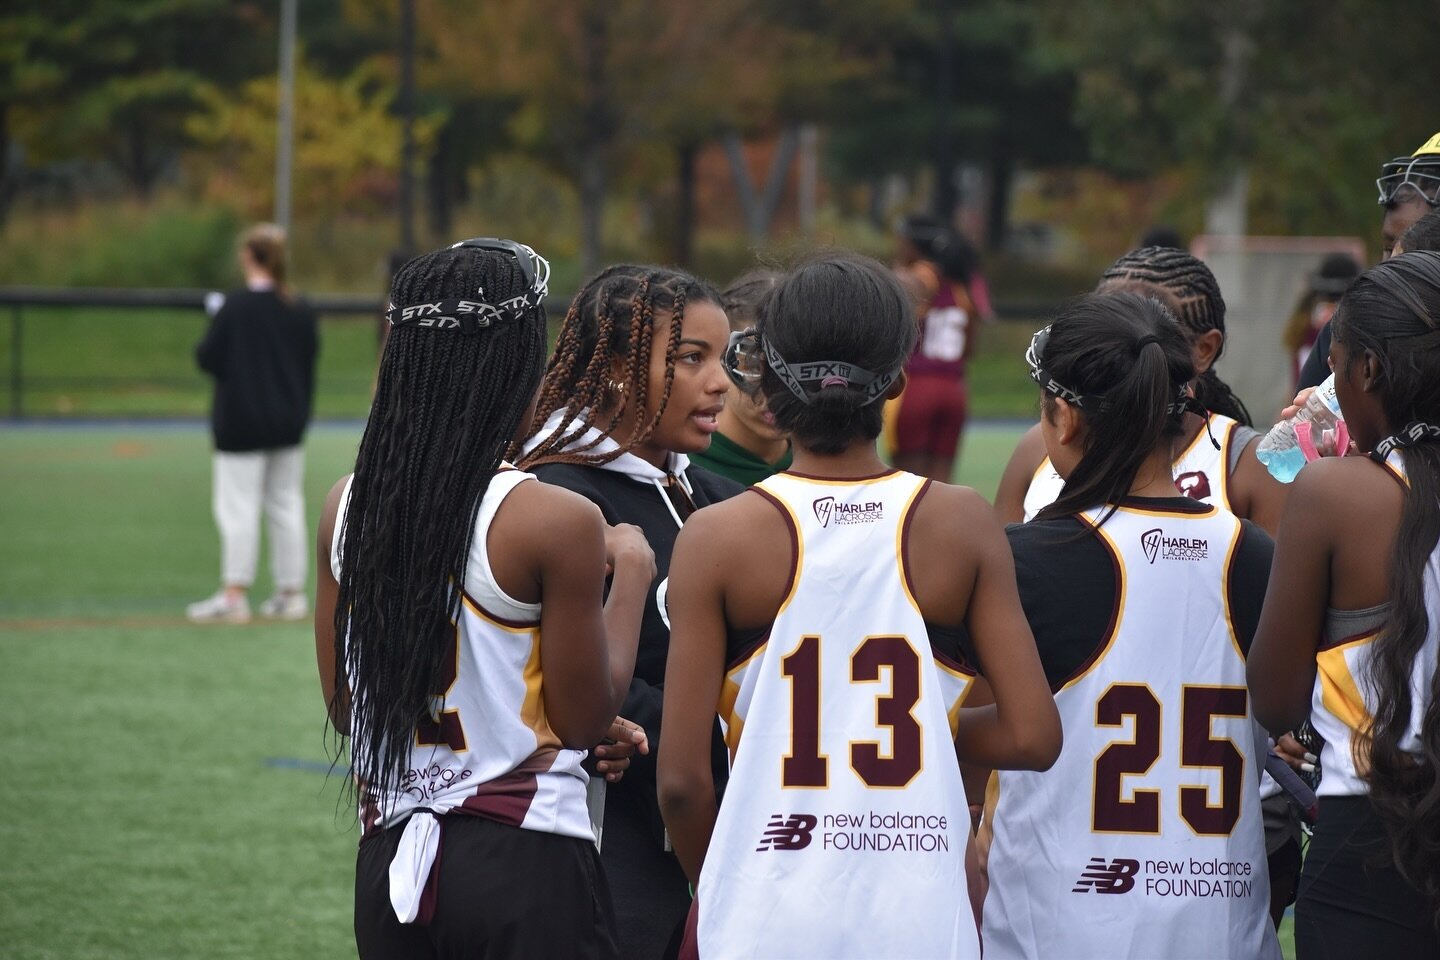 According to a 2023 @deloitte study, 85% of surveyed #women said that the skills they developed playing #sports were important to success in their professional #careers. 

Harlem Lacrosse is committed to both creating and expanding this #success. Com